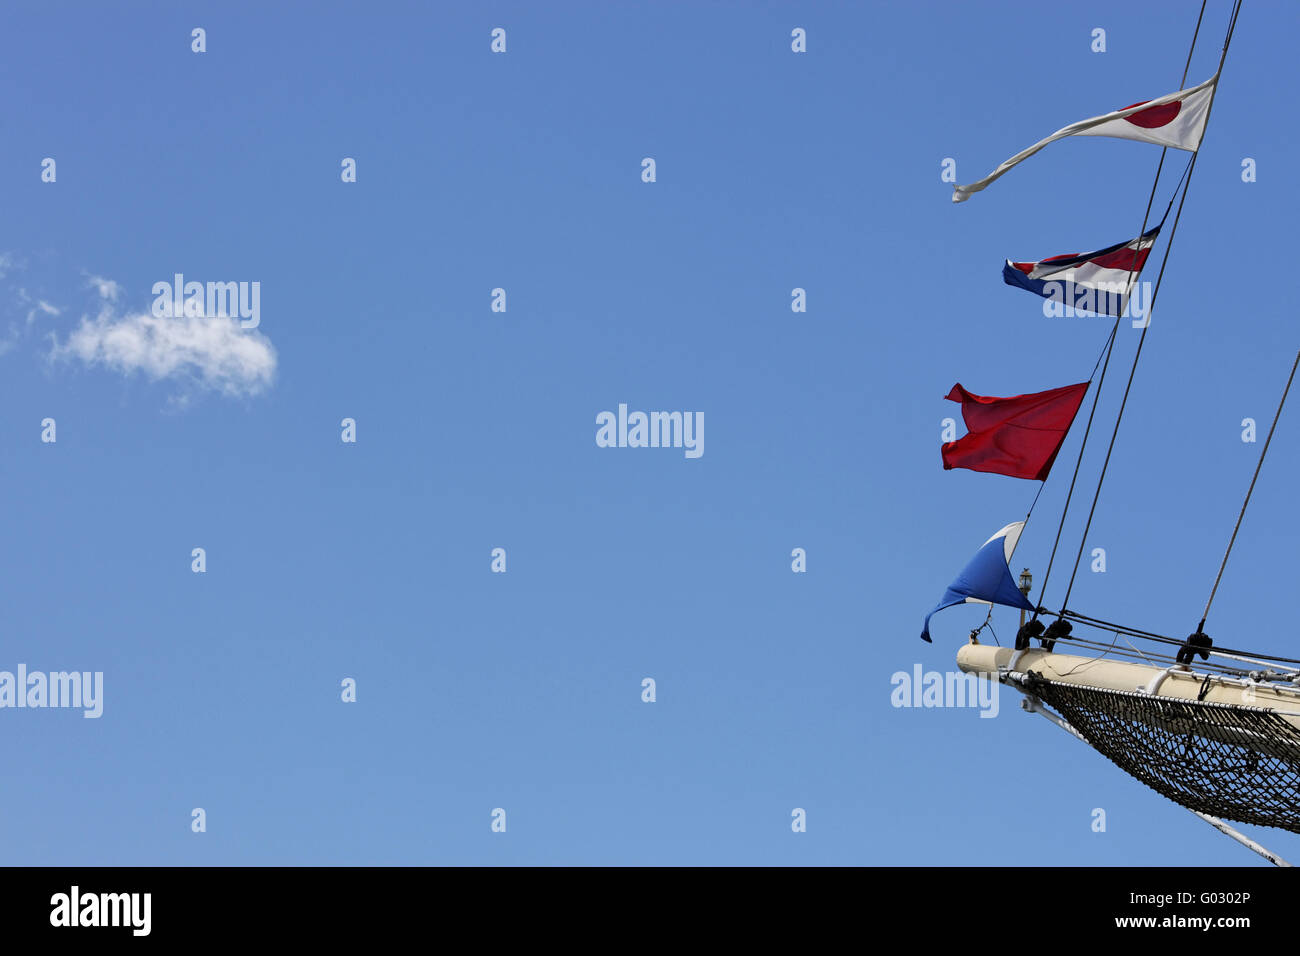 Bow of the barken Viking with signal flags Stock Photo